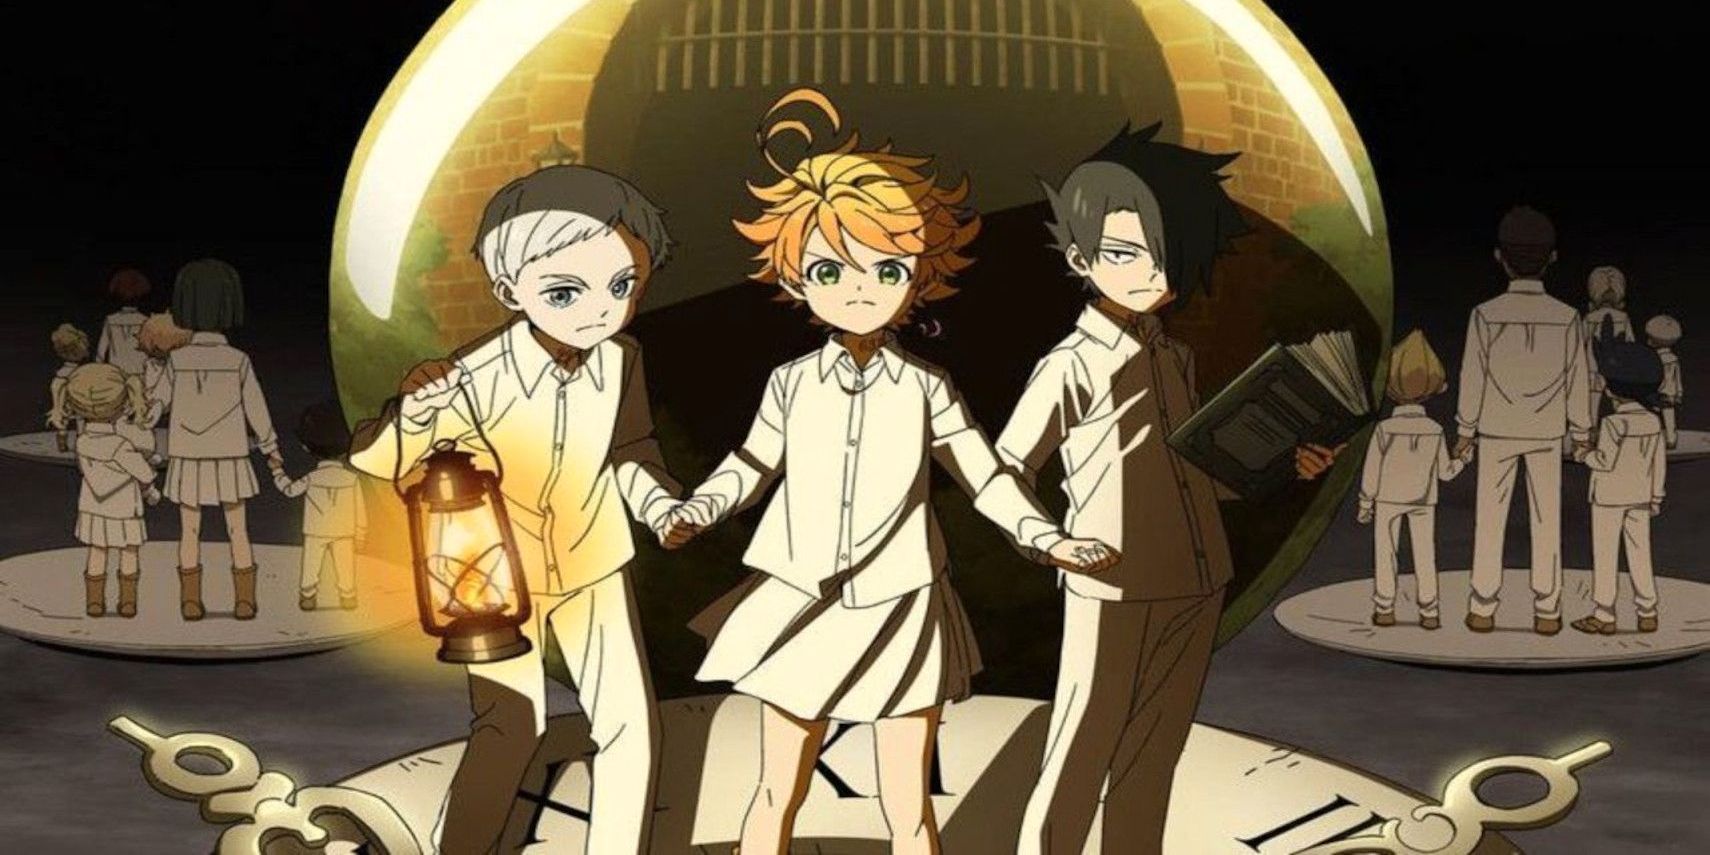 Emma, Norman, and Ray pose (The Promised Neverland)